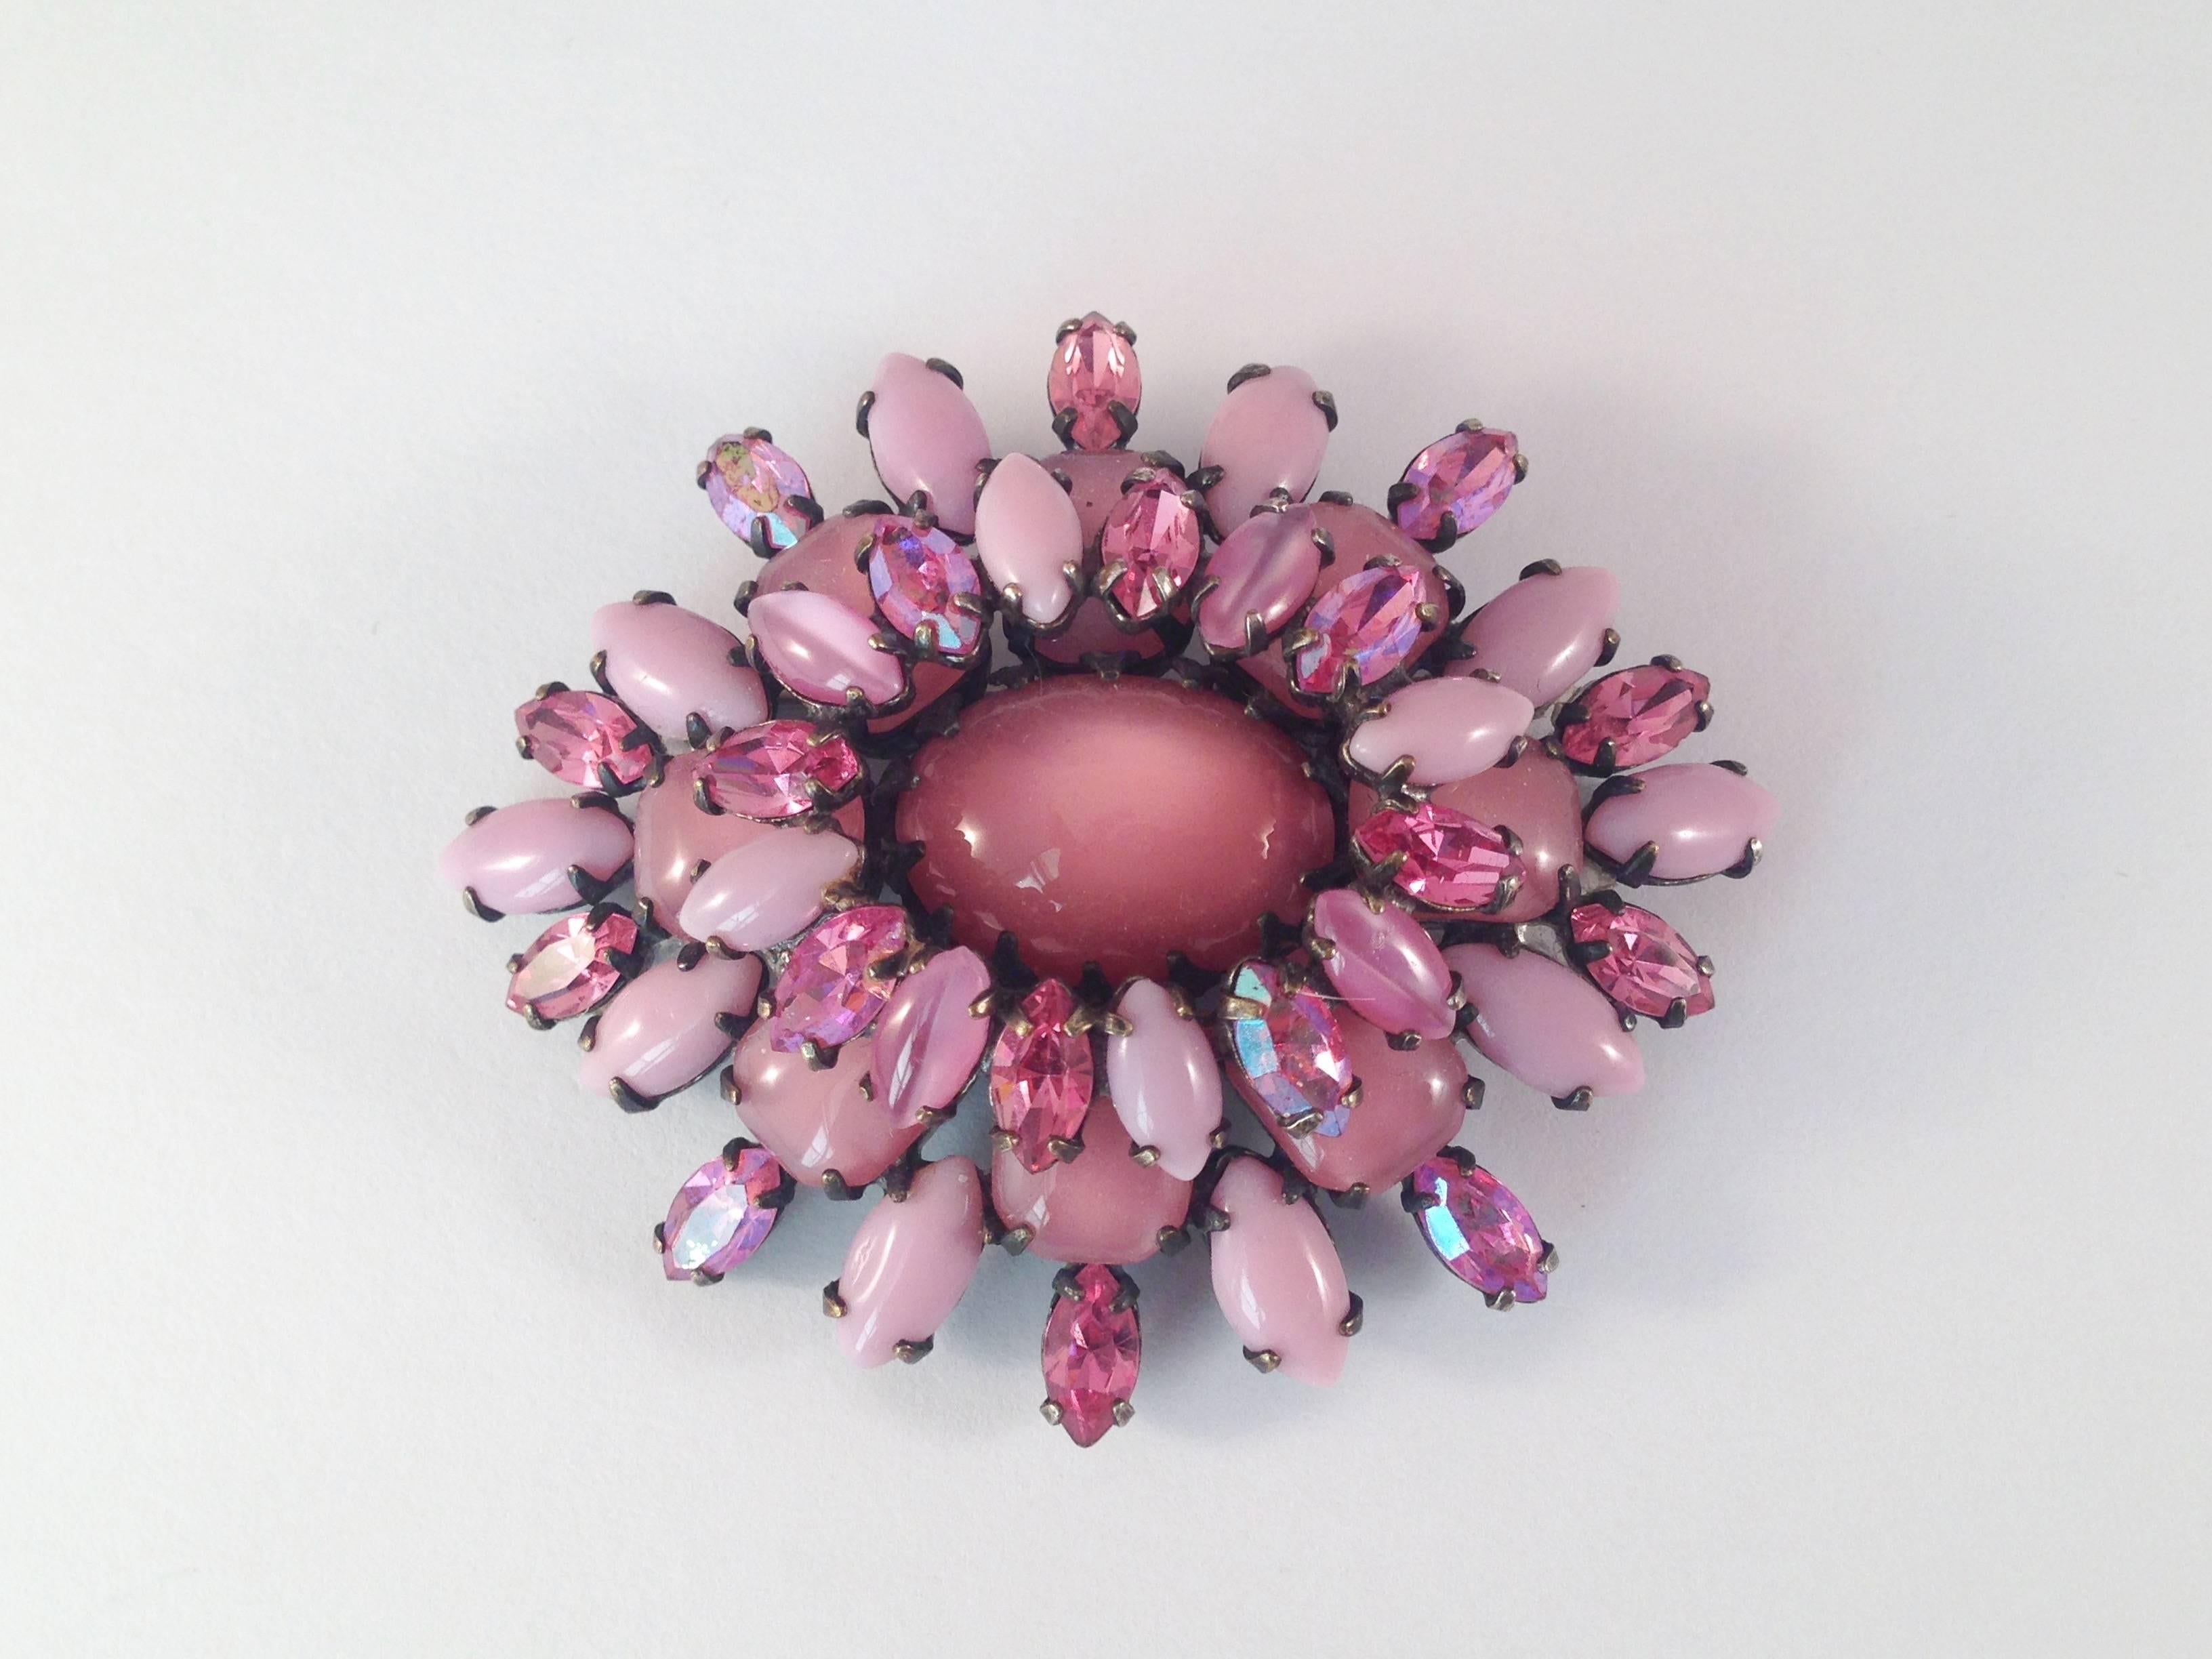 This brooch is a beautiful 1950s pink glass brooch from Schreiner. The colors are gorgeous. It is made up of a mix of pink opaque, clear and rhinestone glass stones. The brooch is in excellent condition. The only flaw to note is that there is some